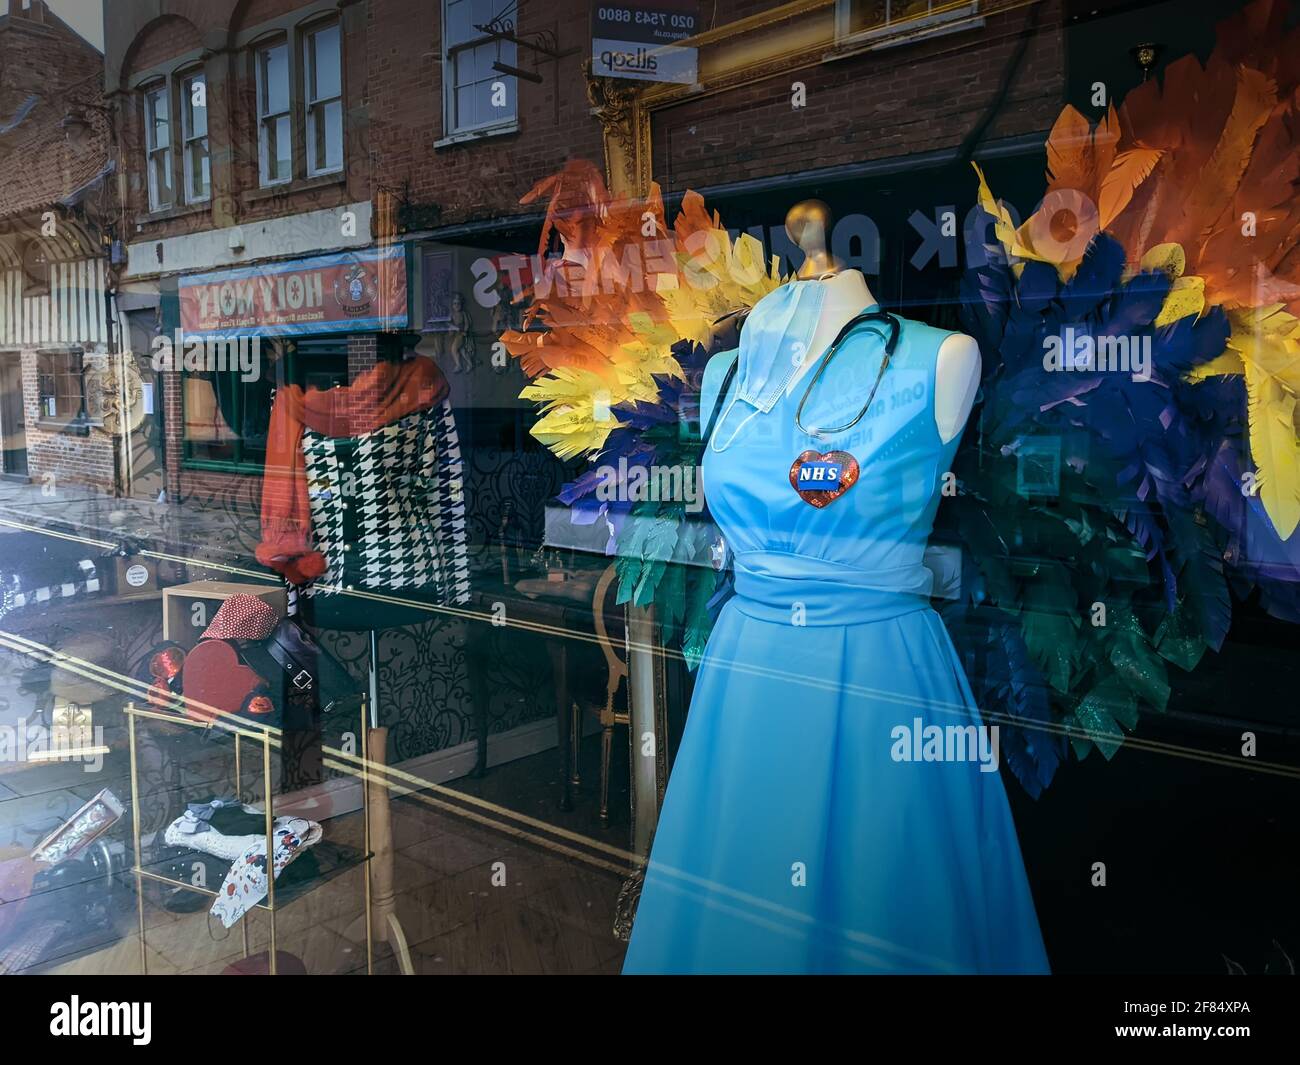 Newark on Trent - 04 February 2021 - NHS Tribute Dress in Retail Shop Window during Covid 19 Lockdown in the UK Stock Photo